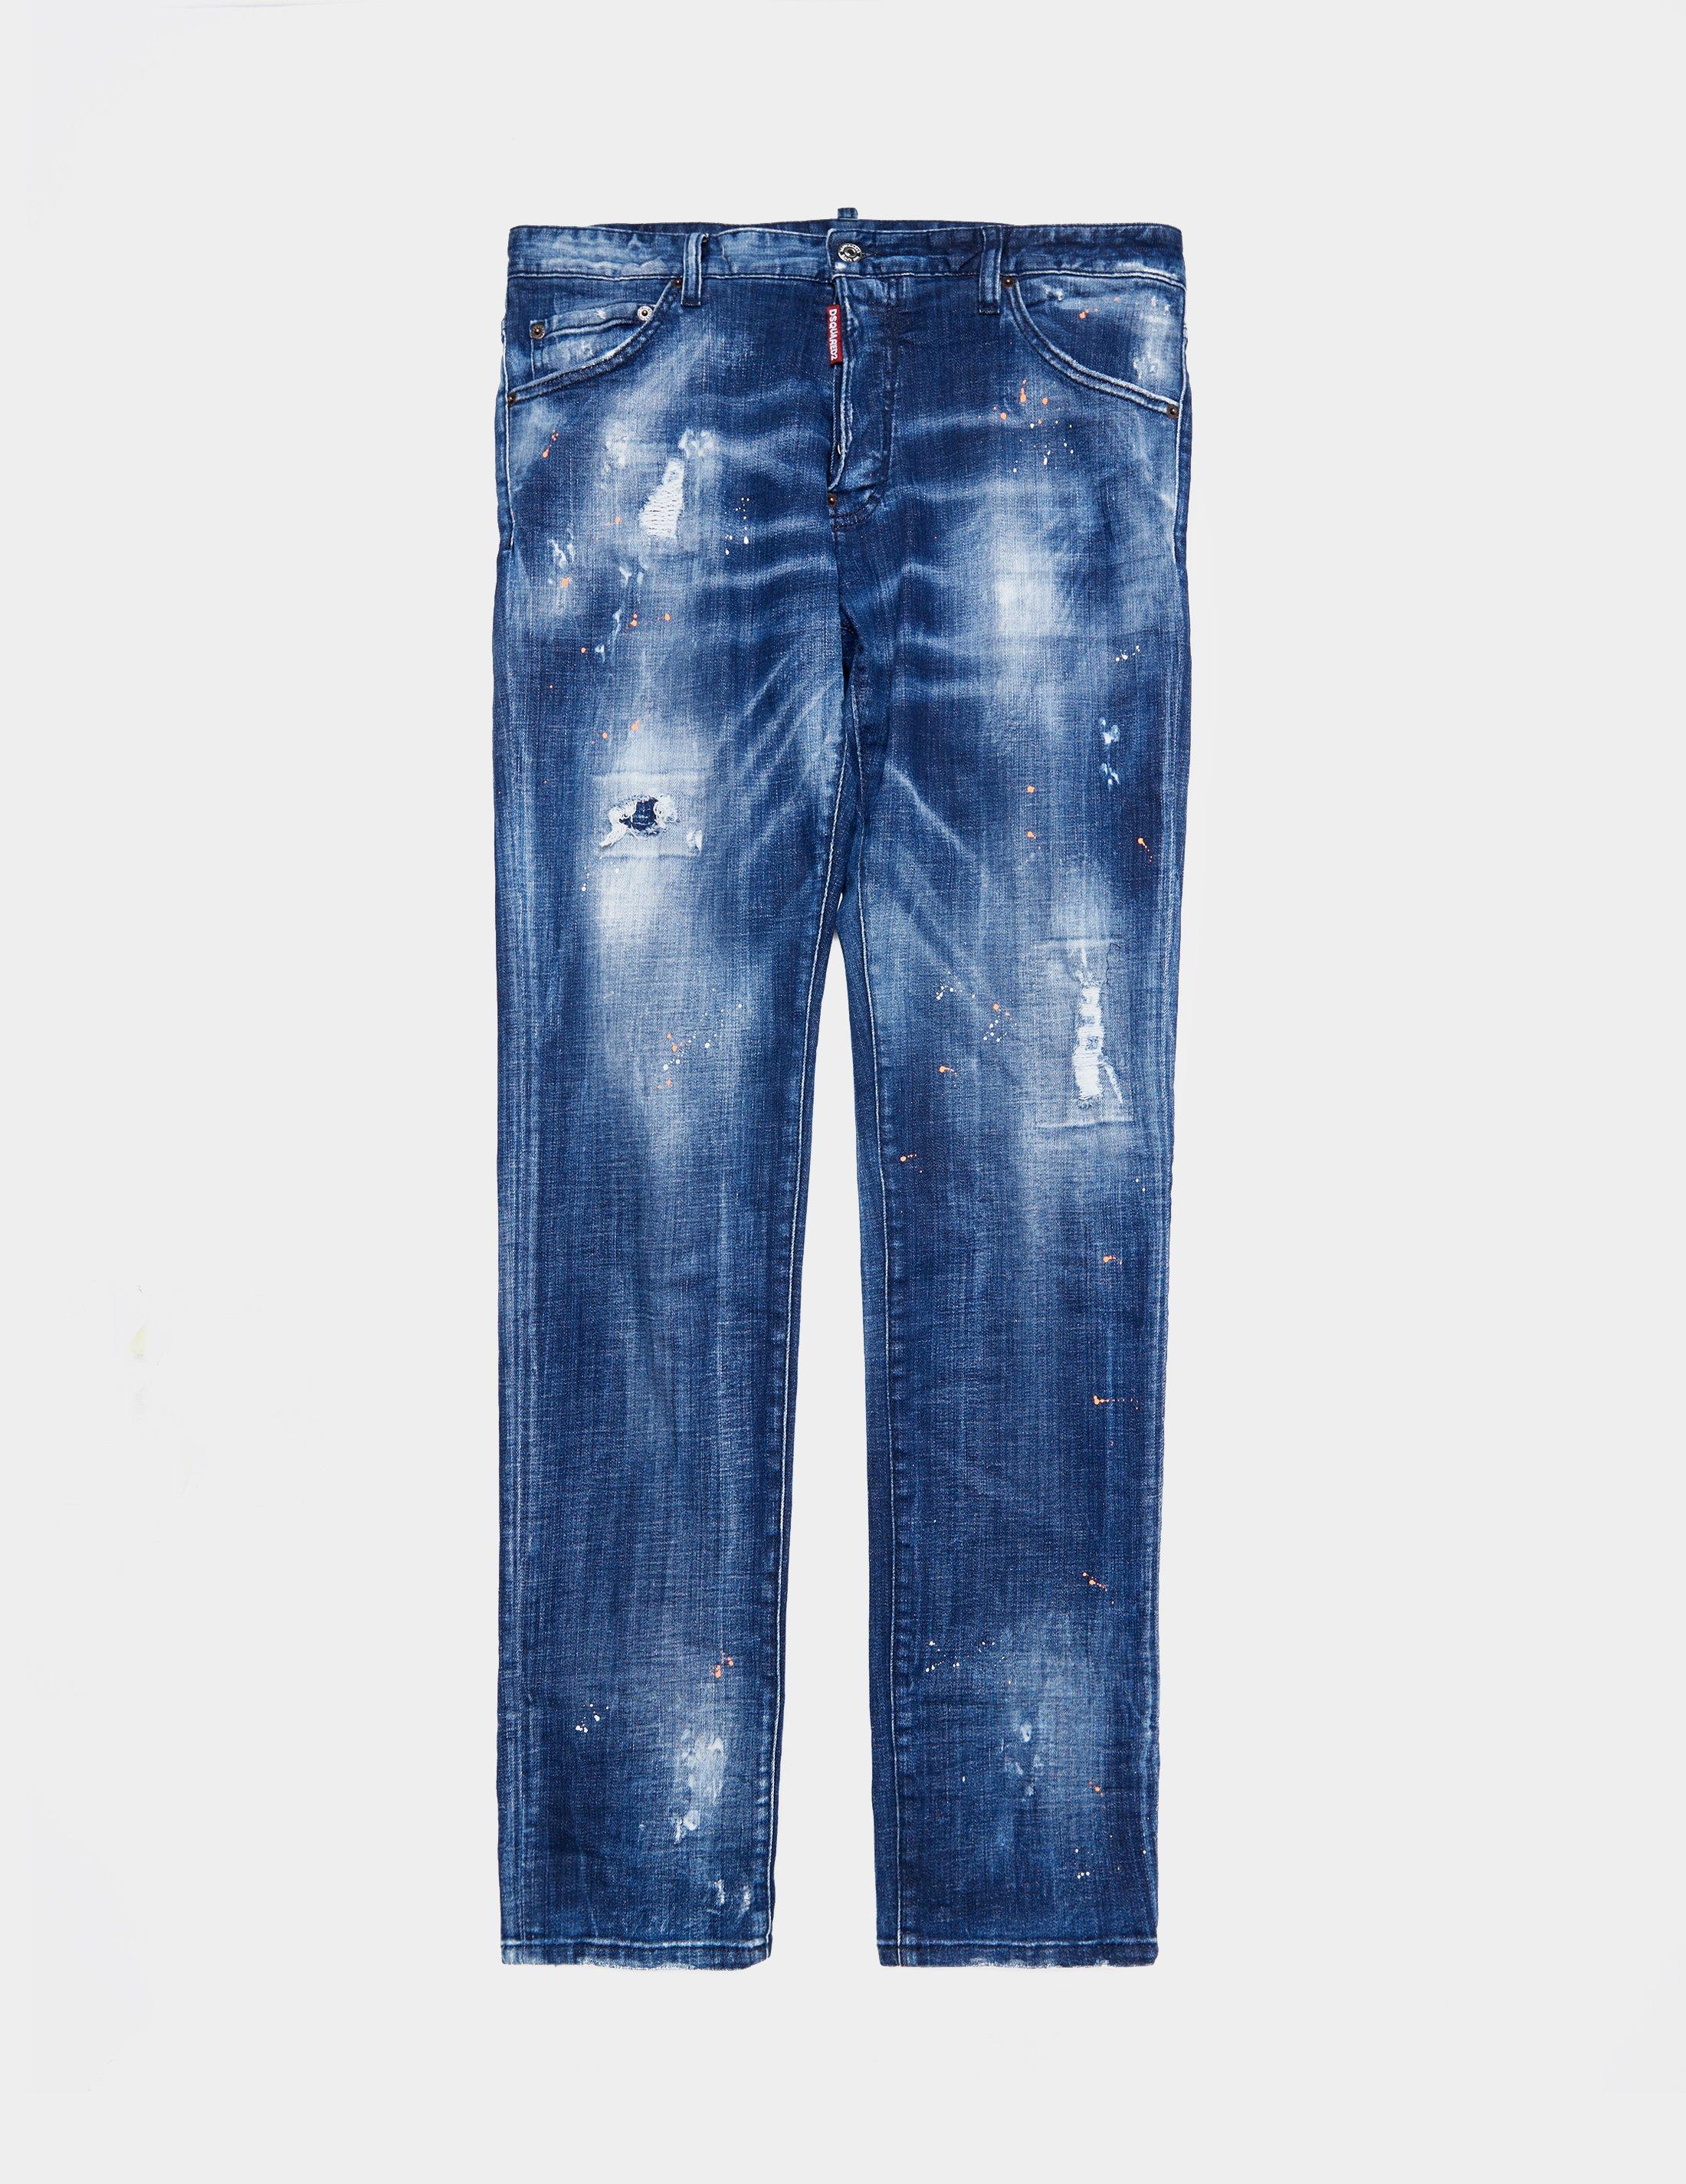 dsquared jeans size guide mens